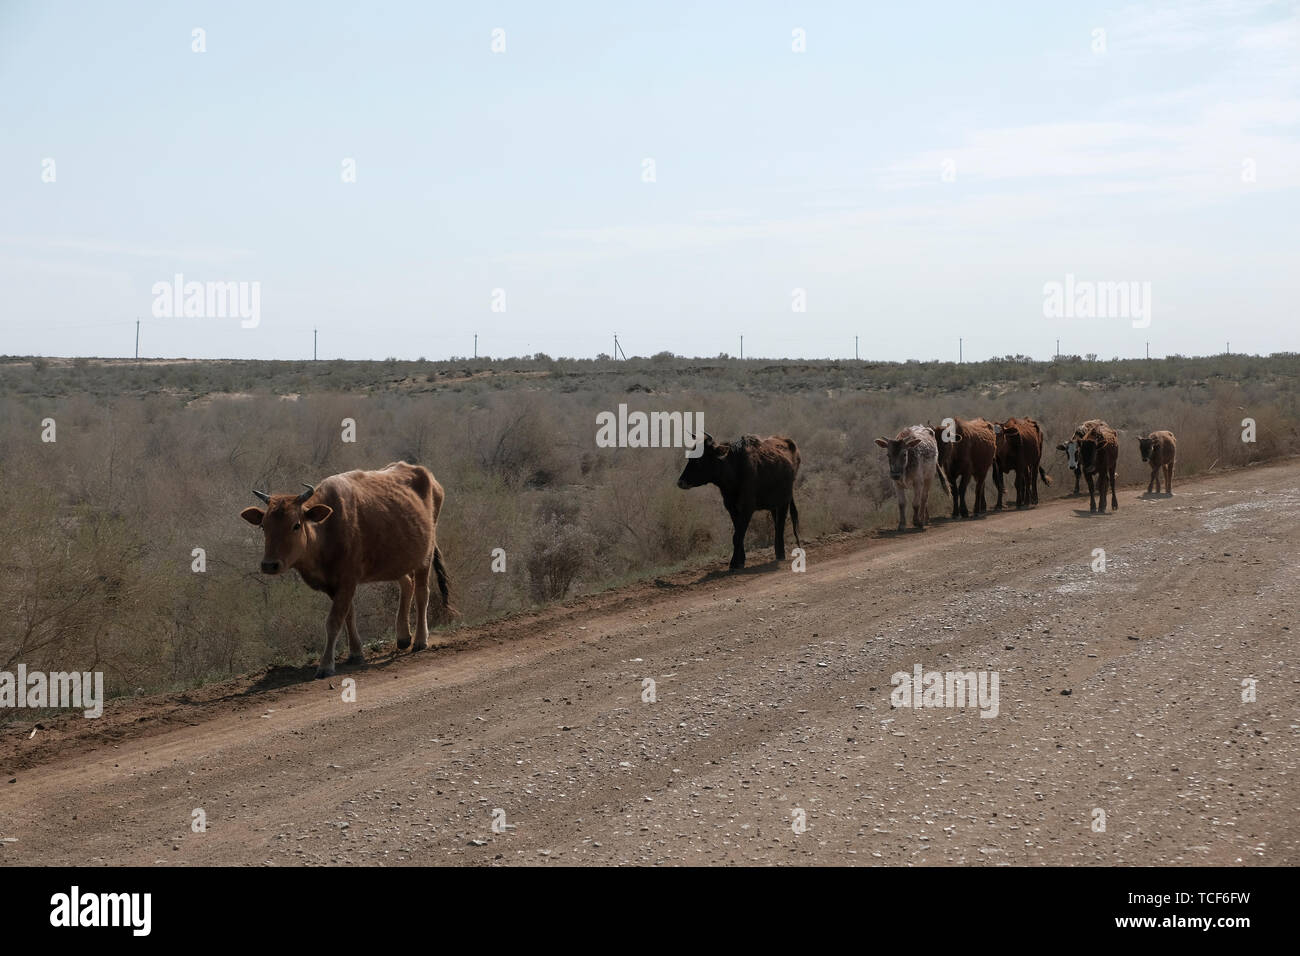 Cattle walk through the dry seabed of Aral Sea which was once the 4th largest in the world now a salty, poisoned wasteland called the Aralkum Desert. Republic of Karakalpakstan, Uzbekistan Stock Photo